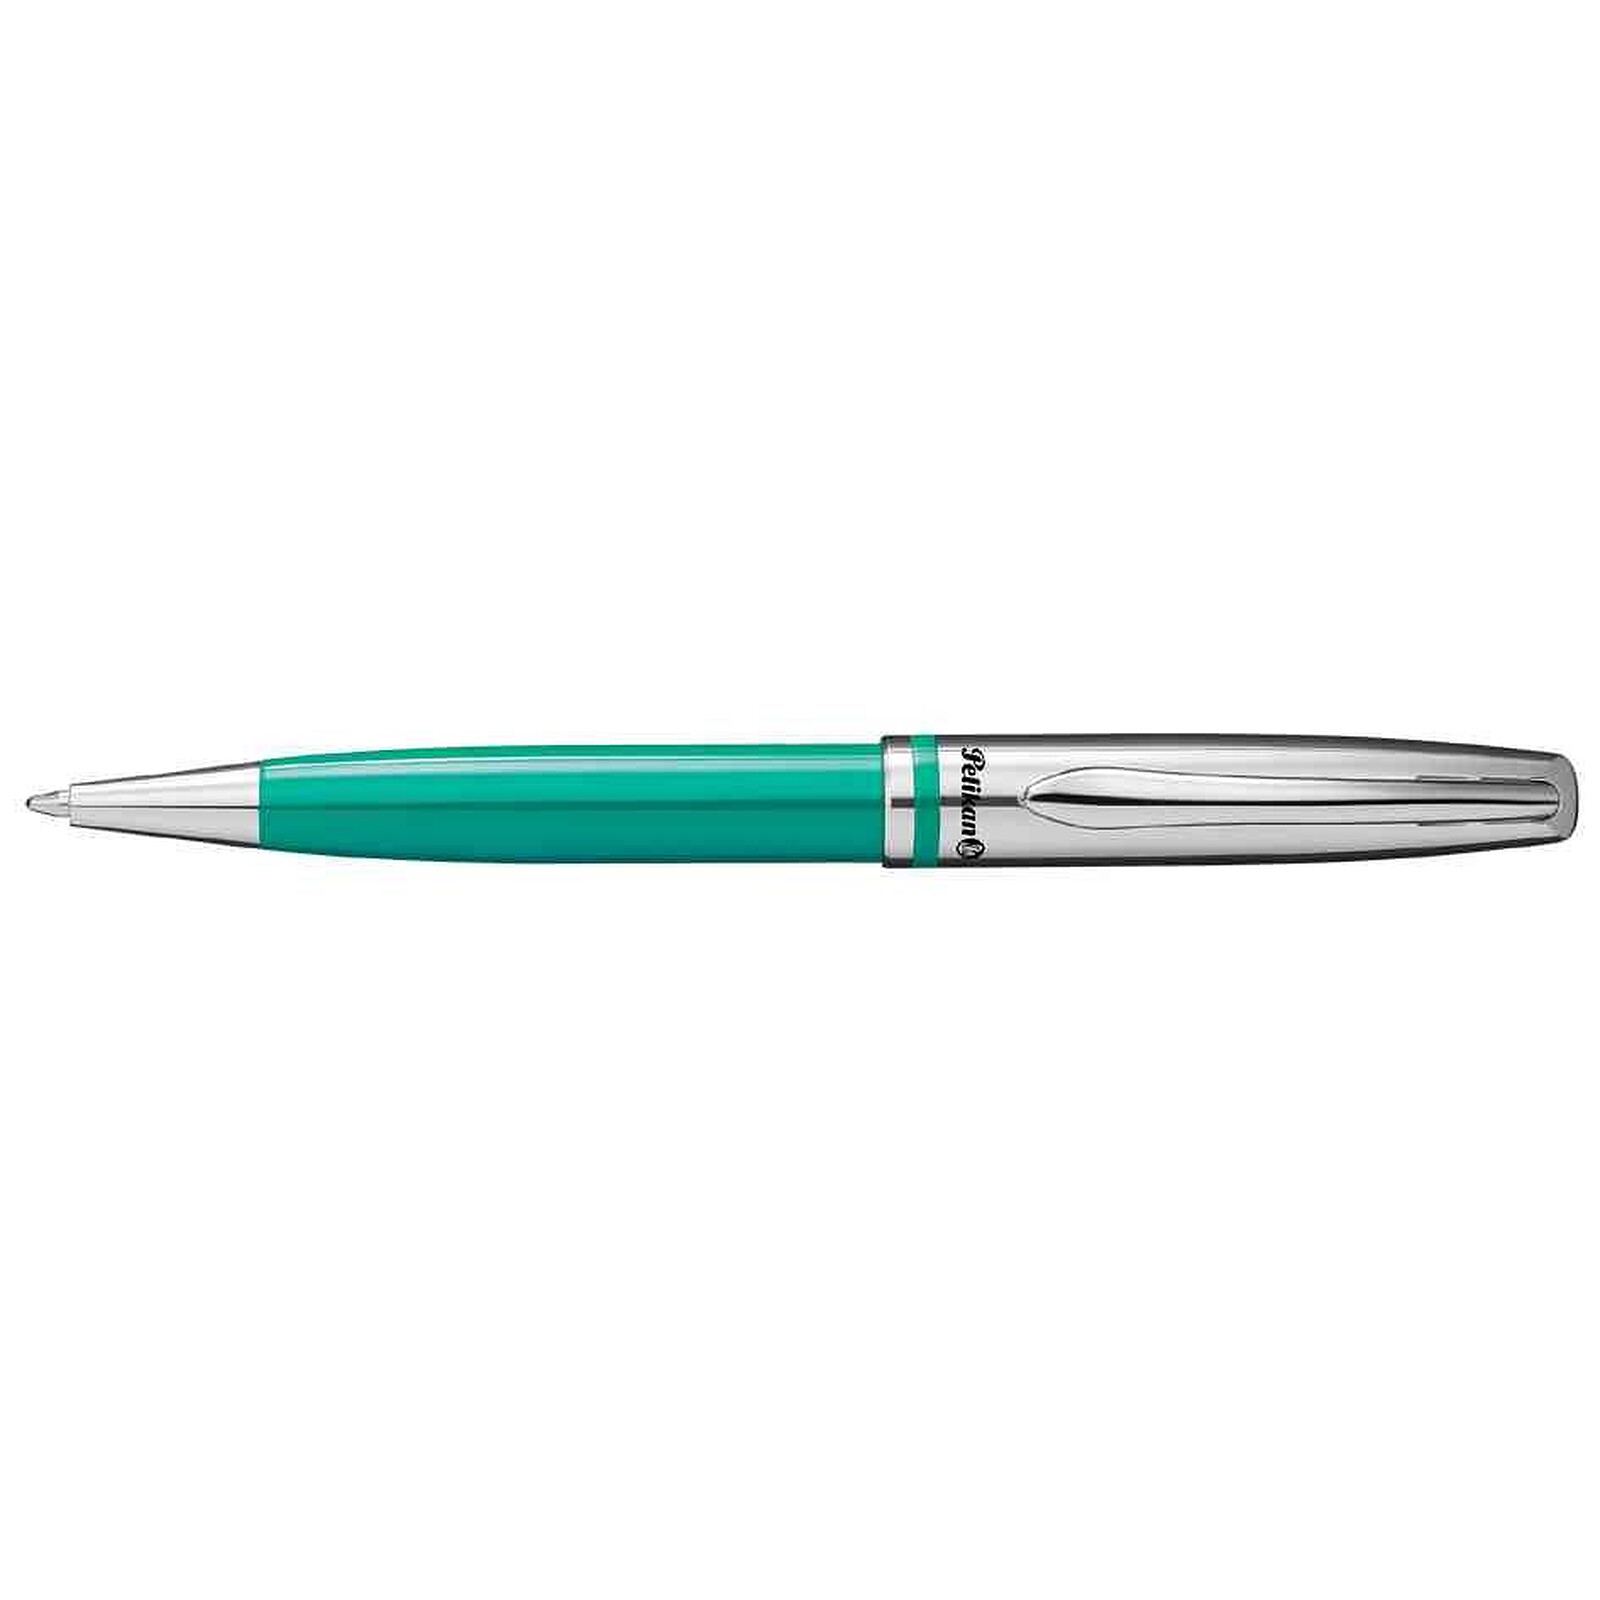 PILOT Stylo roller rétractable Frixion Ball Clicker Pointe Moyenne 0,7  Turquoise x 12 - Stylo & feutre - LDLC